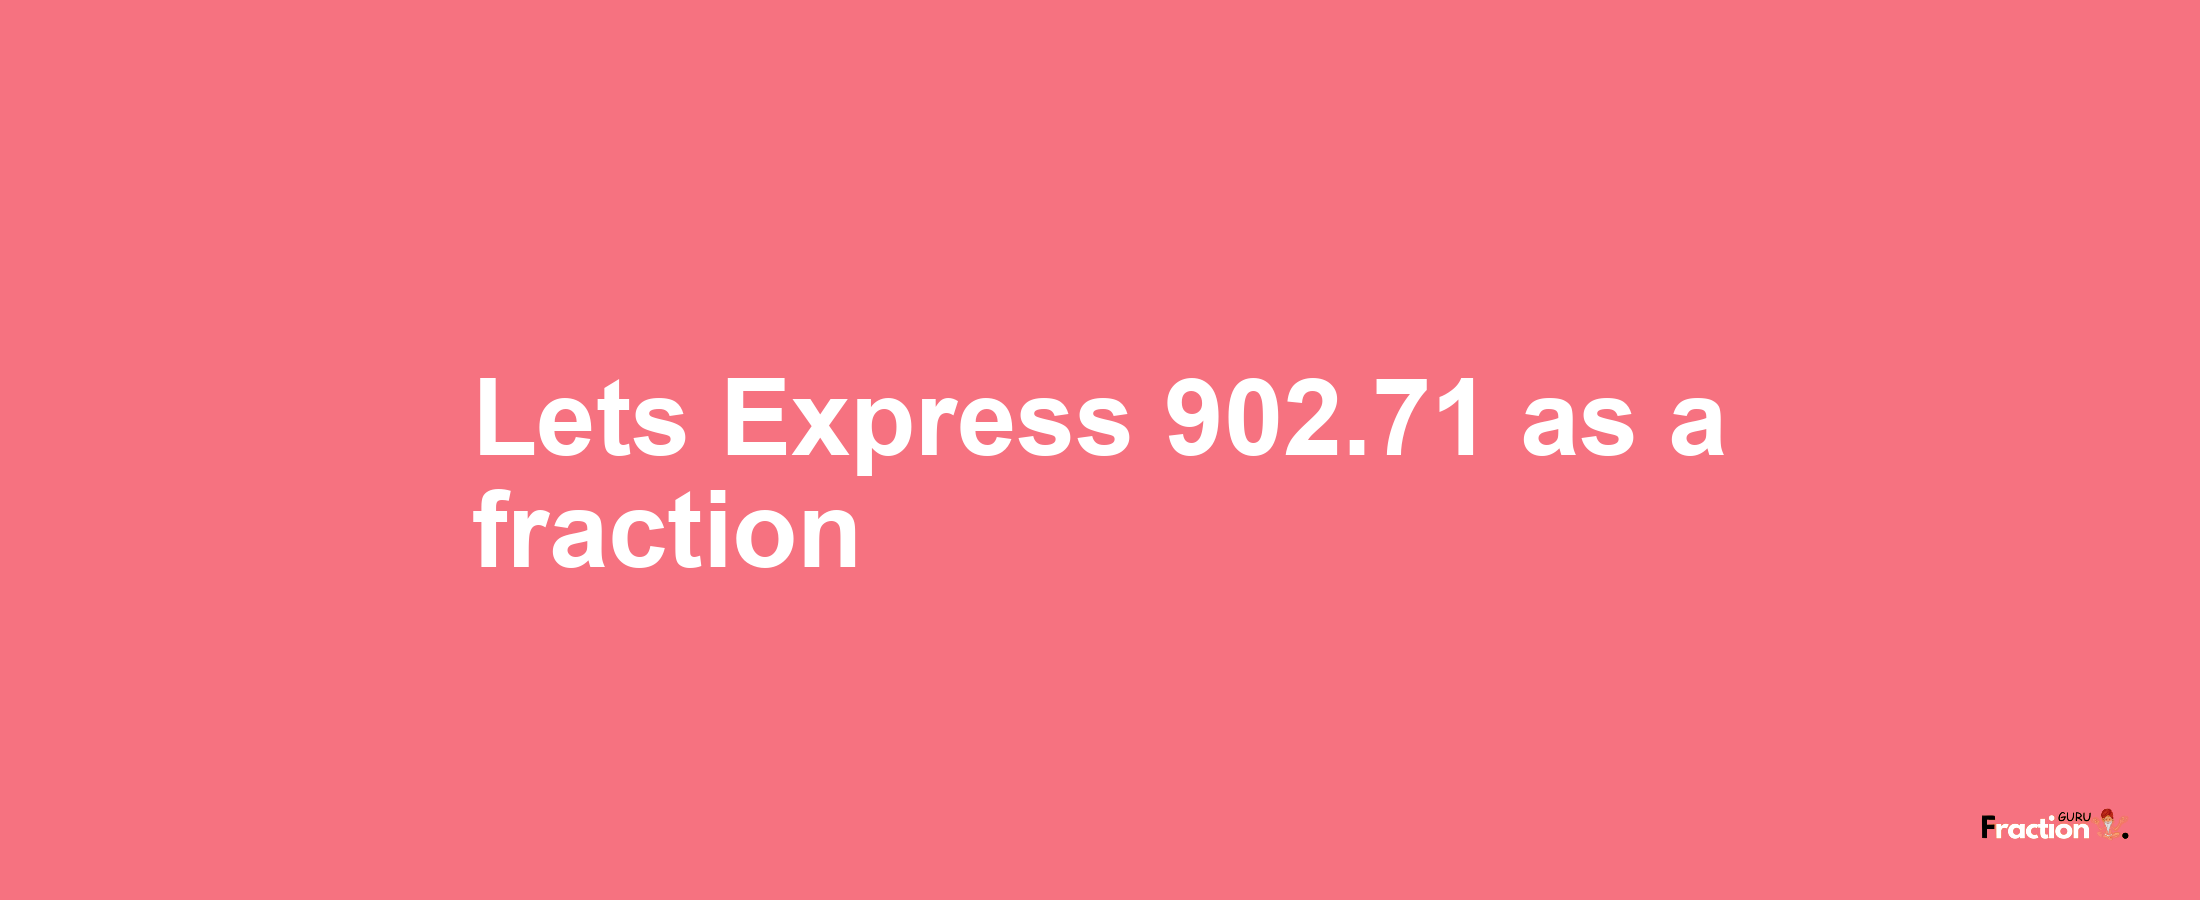 Lets Express 902.71 as afraction